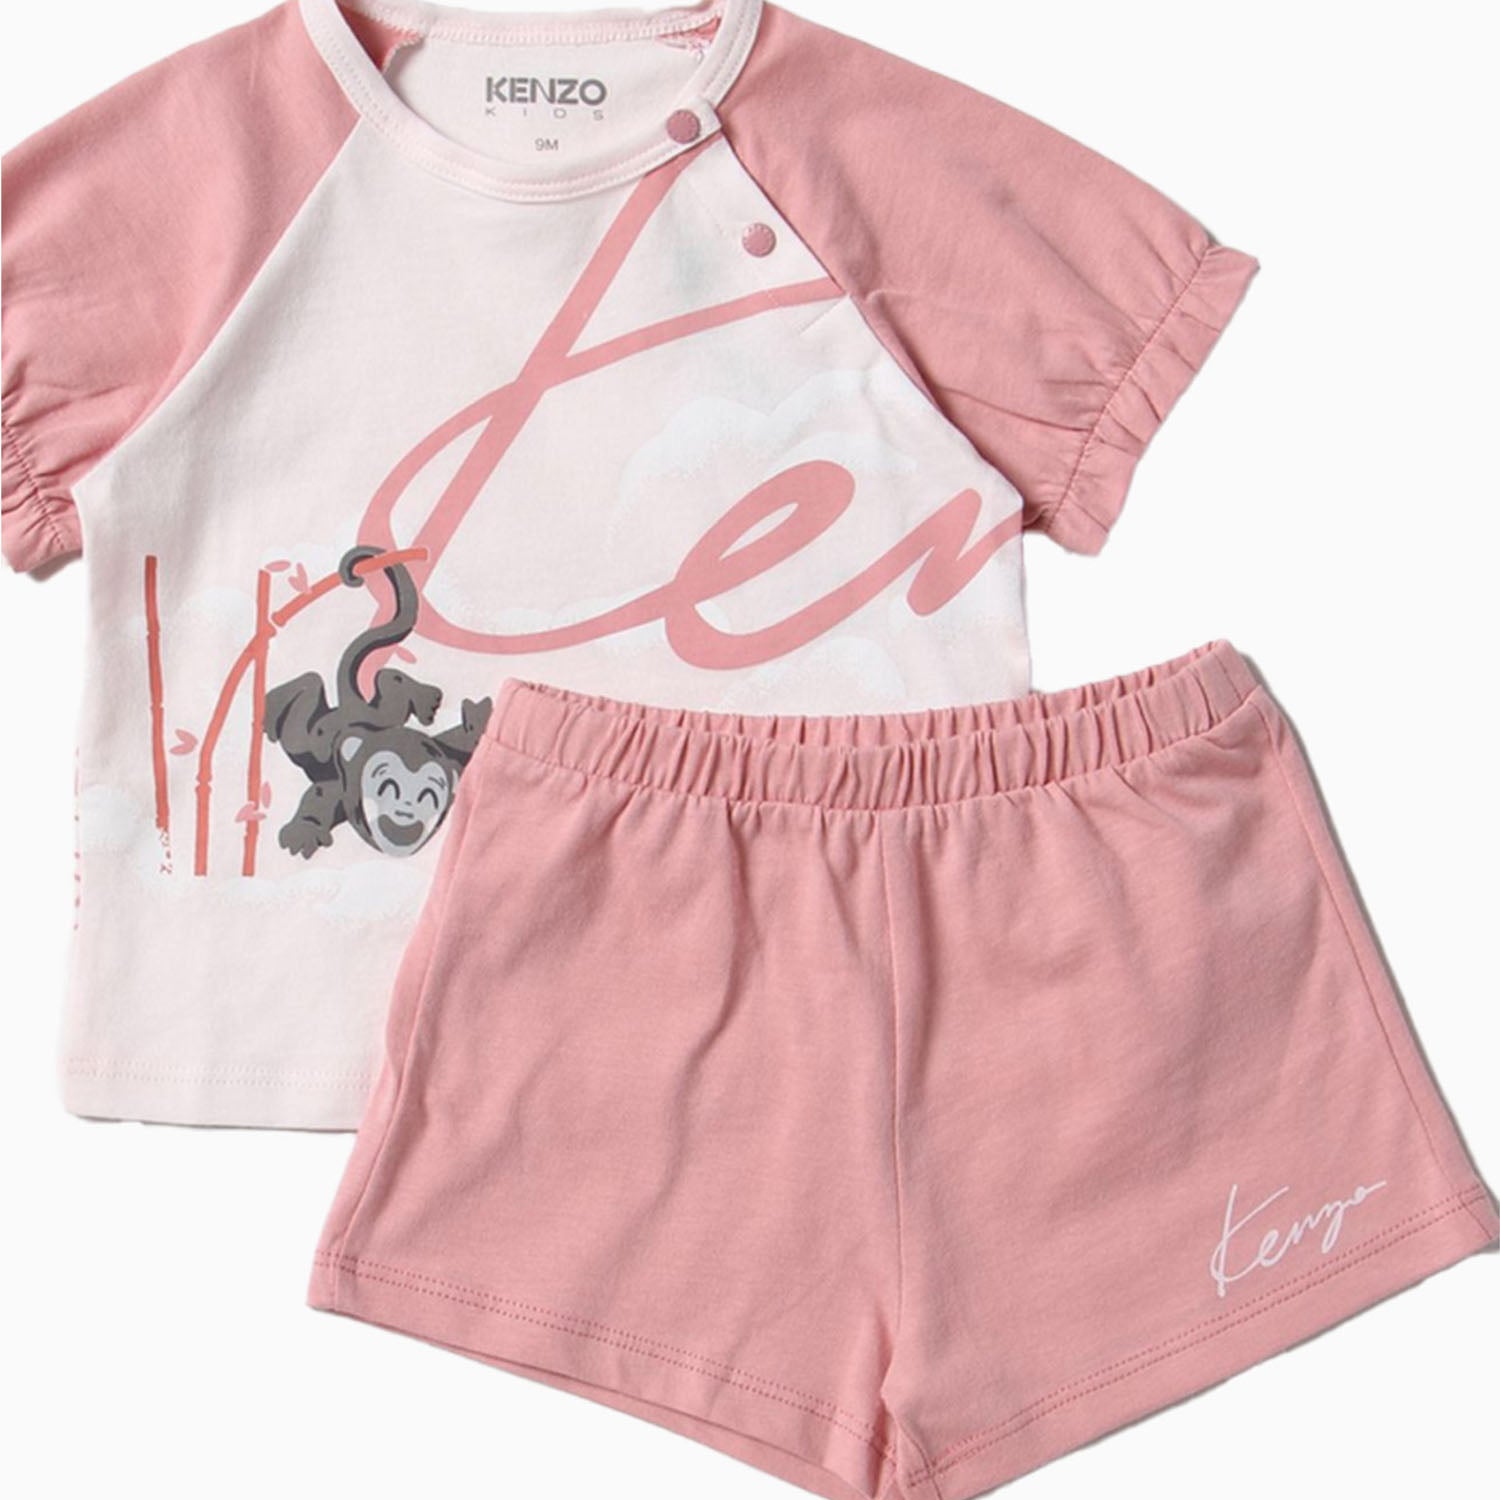 kenzo-kids-organic-jersey-cotton-t-shirt-and-shorts-outfit-k98092-48r